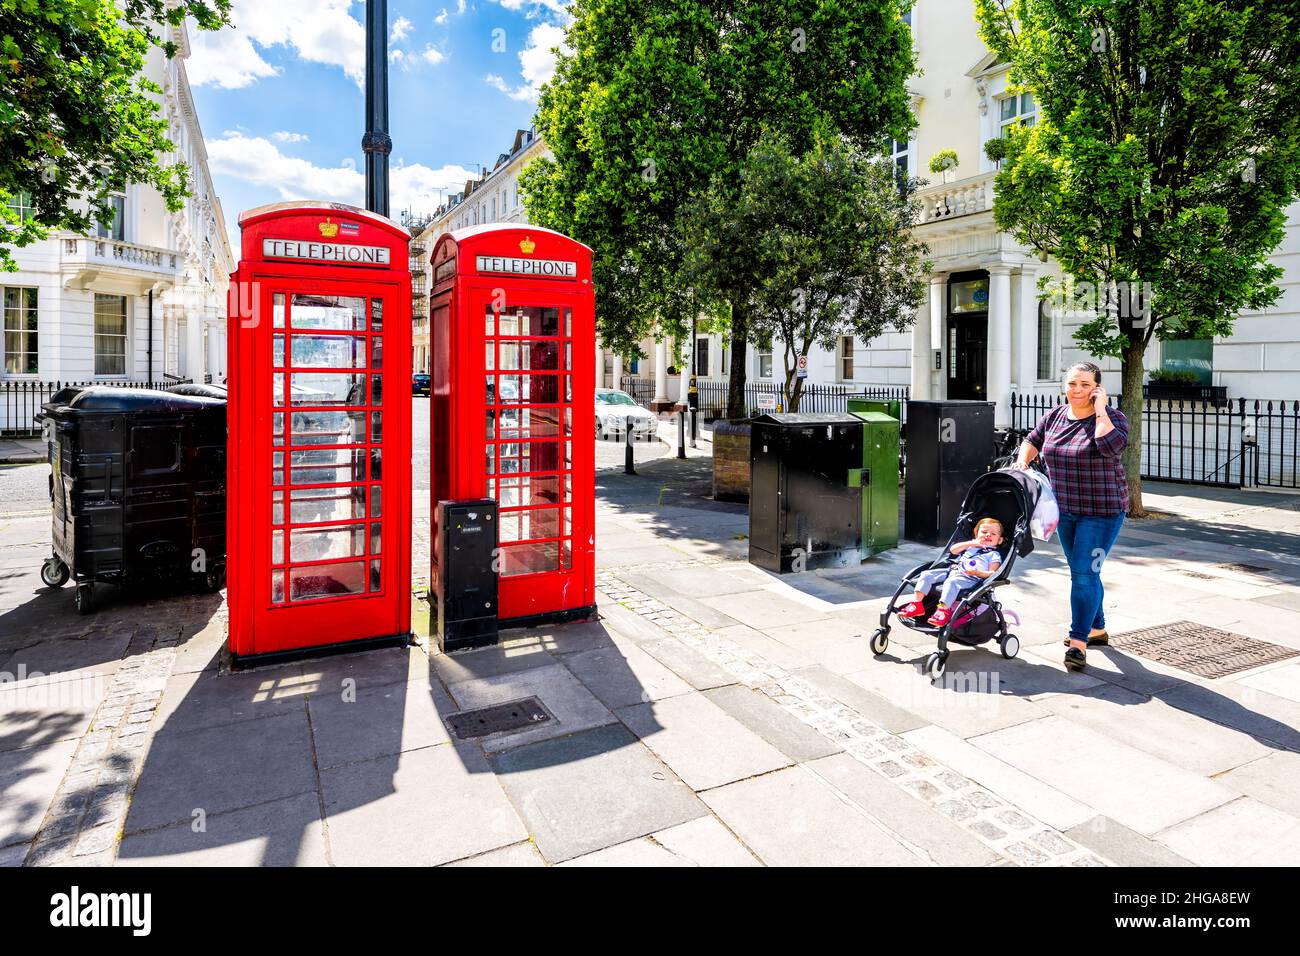 London, UK - June 21, 2018: Street sidewalk road pavement in Pimlico Westminster district area with red telephone booth and candid woman pedestrian wa Stock Photo